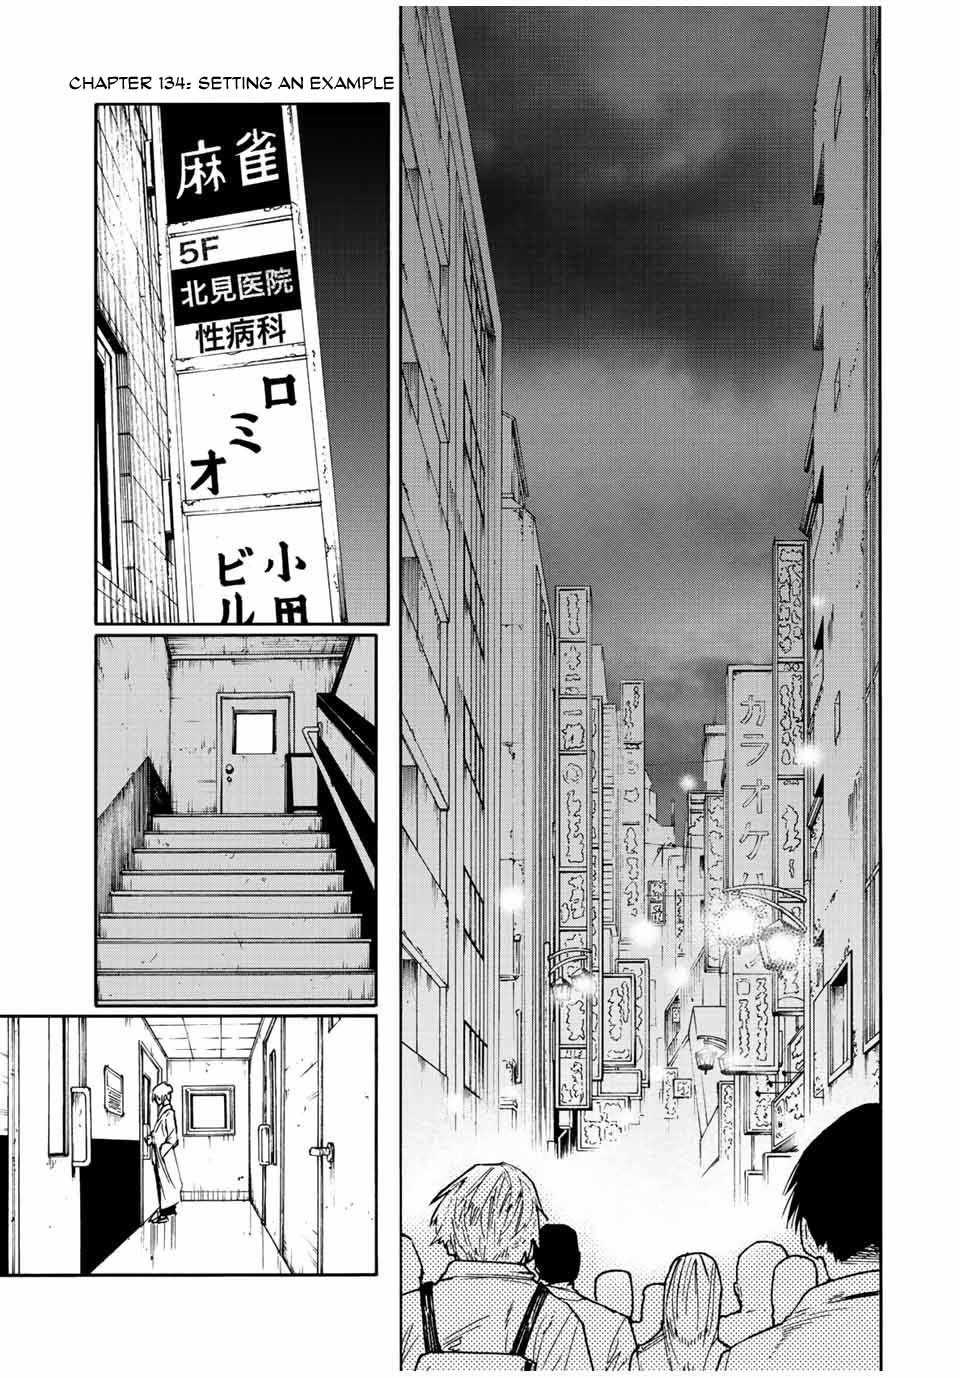 Juujika No Rokunin Chapter 134: Setting An Example - Picture 1